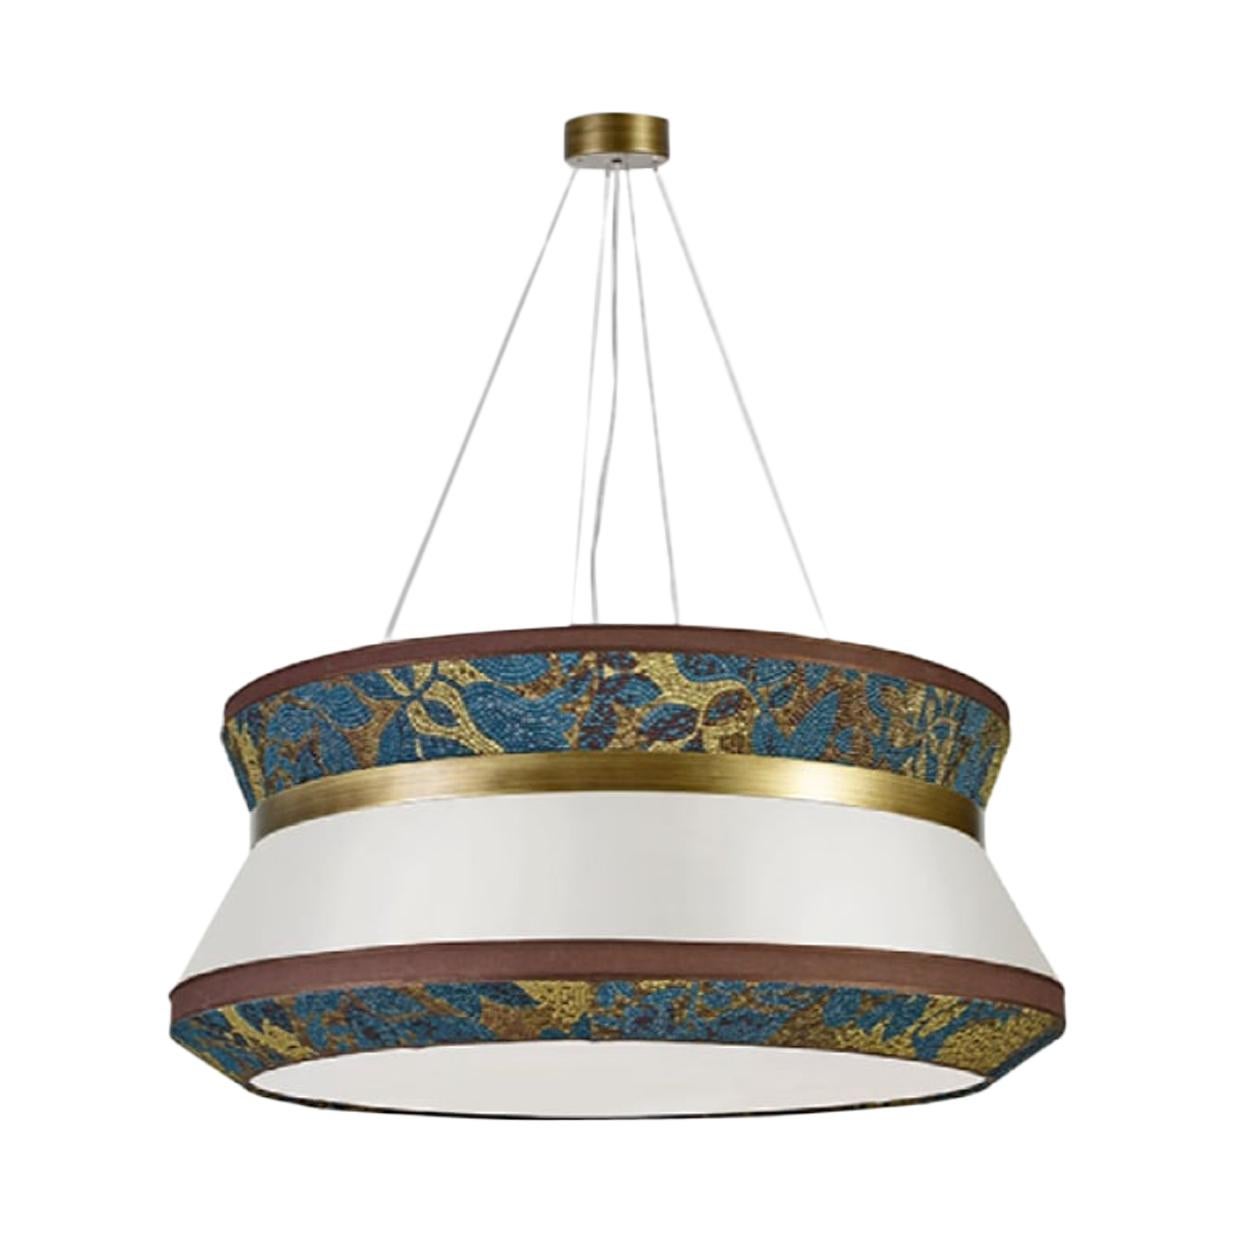 Stylish Ceiling Lamp with Shade in Fabric and Metal frame in Burnished Brass